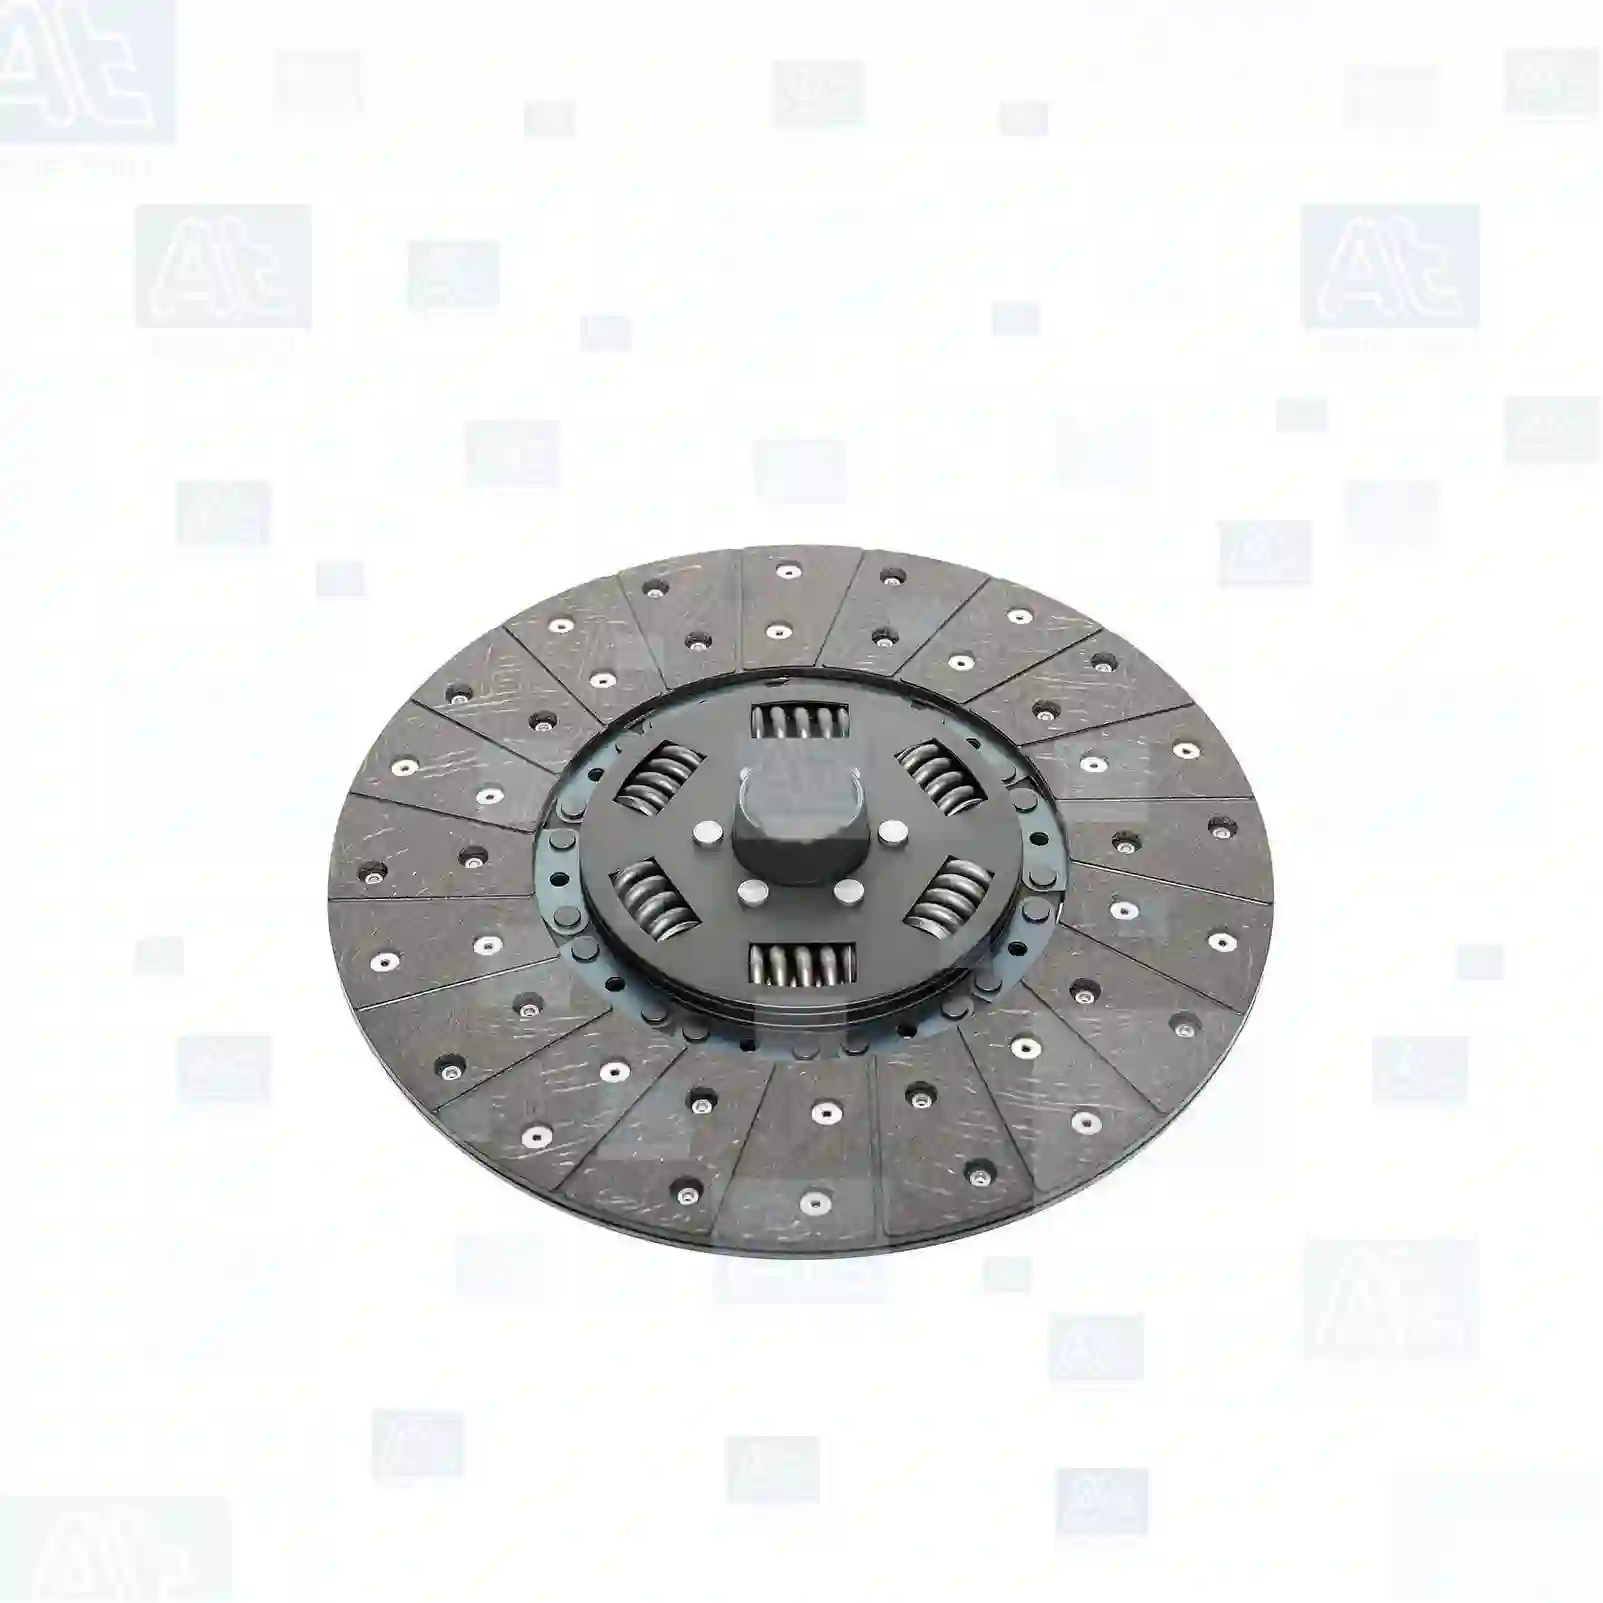 Clutch disc, at no 77722047, oem no: 0012505903, 0012506003, 0022500403, 0022503403, 0022503903, 0022508803, 0032508203, 0032508303, 0032508603, 0042504903, 0052500603, 0052500703, 0052509003, 0072502603, 0082507203, 0092501203, 009250120380, 0092501303, 009250130380, 0092506603, 0102508203, 0102508603, 0132508203, 0132509203, 013250920364, 3452502403, 3452507403, 3452507503, 8383156000, 8383275000, 040120264, 8383156000, 8383275000, 83832750000, 609F160001, 61000160005, 61000160902 At Spare Part | Engine, Accelerator Pedal, Camshaft, Connecting Rod, Crankcase, Crankshaft, Cylinder Head, Engine Suspension Mountings, Exhaust Manifold, Exhaust Gas Recirculation, Filter Kits, Flywheel Housing, General Overhaul Kits, Engine, Intake Manifold, Oil Cleaner, Oil Cooler, Oil Filter, Oil Pump, Oil Sump, Piston & Liner, Sensor & Switch, Timing Case, Turbocharger, Cooling System, Belt Tensioner, Coolant Filter, Coolant Pipe, Corrosion Prevention Agent, Drive, Expansion Tank, Fan, Intercooler, Monitors & Gauges, Radiator, Thermostat, V-Belt / Timing belt, Water Pump, Fuel System, Electronical Injector Unit, Feed Pump, Fuel Filter, cpl., Fuel Gauge Sender,  Fuel Line, Fuel Pump, Fuel Tank, Injection Line Kit, Injection Pump, Exhaust System, Clutch & Pedal, Gearbox, Propeller Shaft, Axles, Brake System, Hubs & Wheels, Suspension, Leaf Spring, Universal Parts / Accessories, Steering, Electrical System, Cabin Clutch disc, at no 77722047, oem no: 0012505903, 0012506003, 0022500403, 0022503403, 0022503903, 0022508803, 0032508203, 0032508303, 0032508603, 0042504903, 0052500603, 0052500703, 0052509003, 0072502603, 0082507203, 0092501203, 009250120380, 0092501303, 009250130380, 0092506603, 0102508203, 0102508603, 0132508203, 0132509203, 013250920364, 3452502403, 3452507403, 3452507503, 8383156000, 8383275000, 040120264, 8383156000, 8383275000, 83832750000, 609F160001, 61000160005, 61000160902 At Spare Part | Engine, Accelerator Pedal, Camshaft, Connecting Rod, Crankcase, Crankshaft, Cylinder Head, Engine Suspension Mountings, Exhaust Manifold, Exhaust Gas Recirculation, Filter Kits, Flywheel Housing, General Overhaul Kits, Engine, Intake Manifold, Oil Cleaner, Oil Cooler, Oil Filter, Oil Pump, Oil Sump, Piston & Liner, Sensor & Switch, Timing Case, Turbocharger, Cooling System, Belt Tensioner, Coolant Filter, Coolant Pipe, Corrosion Prevention Agent, Drive, Expansion Tank, Fan, Intercooler, Monitors & Gauges, Radiator, Thermostat, V-Belt / Timing belt, Water Pump, Fuel System, Electronical Injector Unit, Feed Pump, Fuel Filter, cpl., Fuel Gauge Sender,  Fuel Line, Fuel Pump, Fuel Tank, Injection Line Kit, Injection Pump, Exhaust System, Clutch & Pedal, Gearbox, Propeller Shaft, Axles, Brake System, Hubs & Wheels, Suspension, Leaf Spring, Universal Parts / Accessories, Steering, Electrical System, Cabin